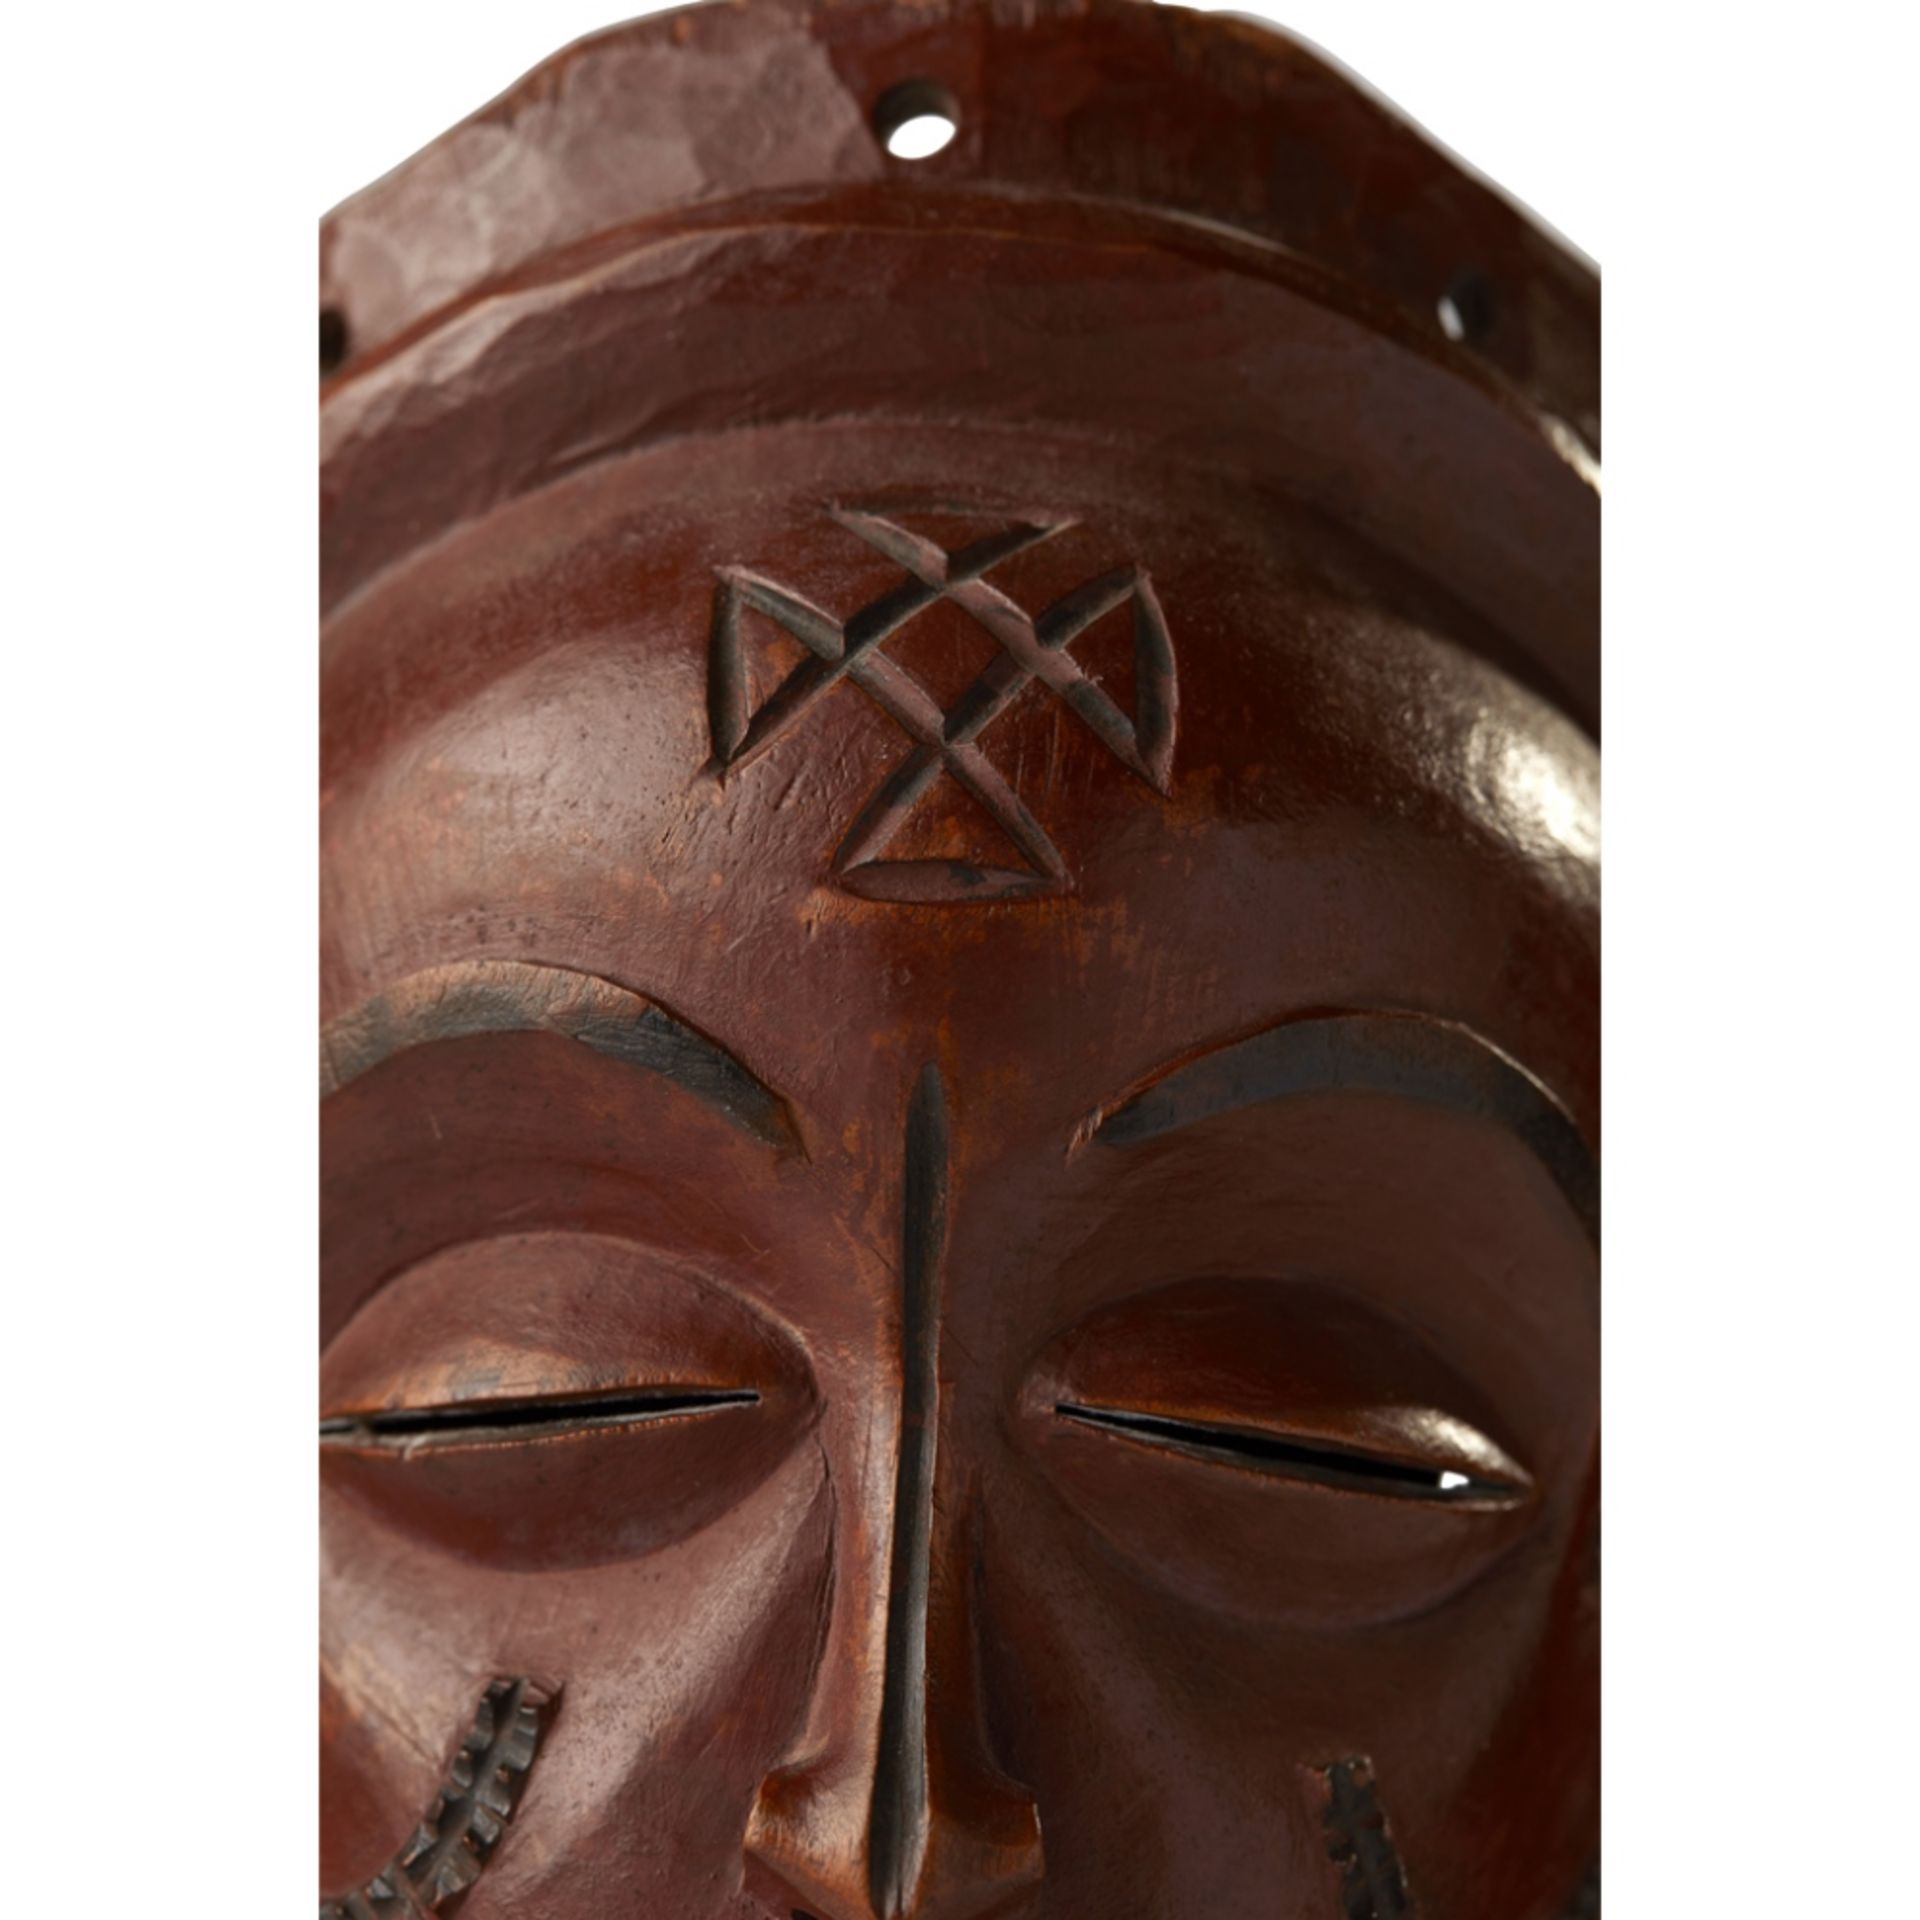 CHOKWE MASK, PWOANGOLA carved wood, the softly curving chin below fractionally parted lips, a medial - Image 3 of 6